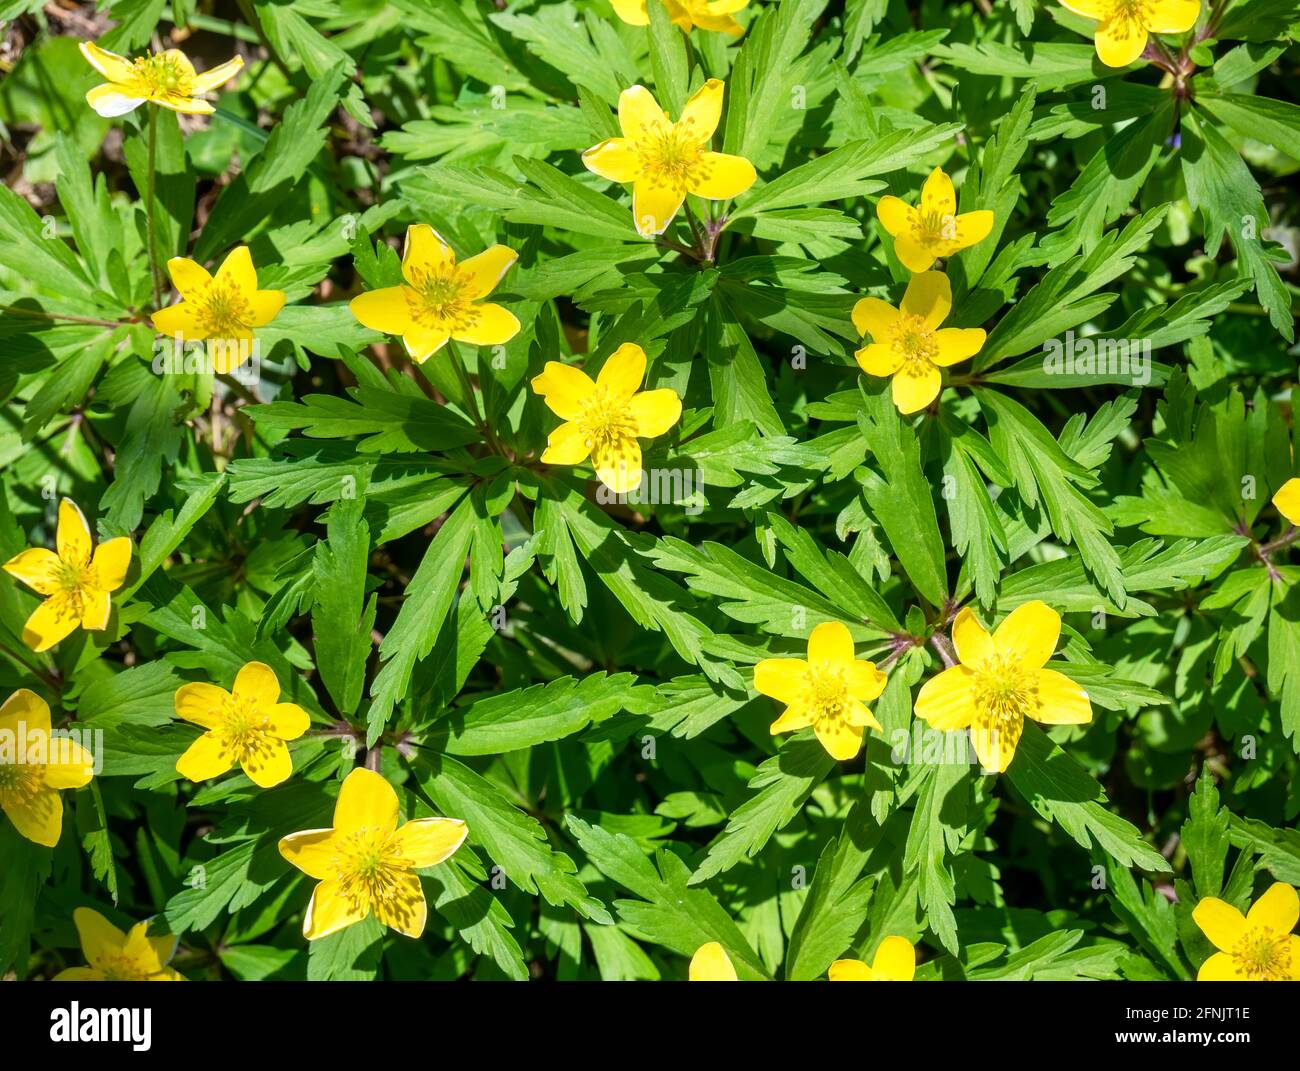 Anemonoides ranunculoides, Anemone ranunculoides), the yellow anemone, yellow wood anemone, or buttercup anemone yellow flowers on the field. Stock Photo